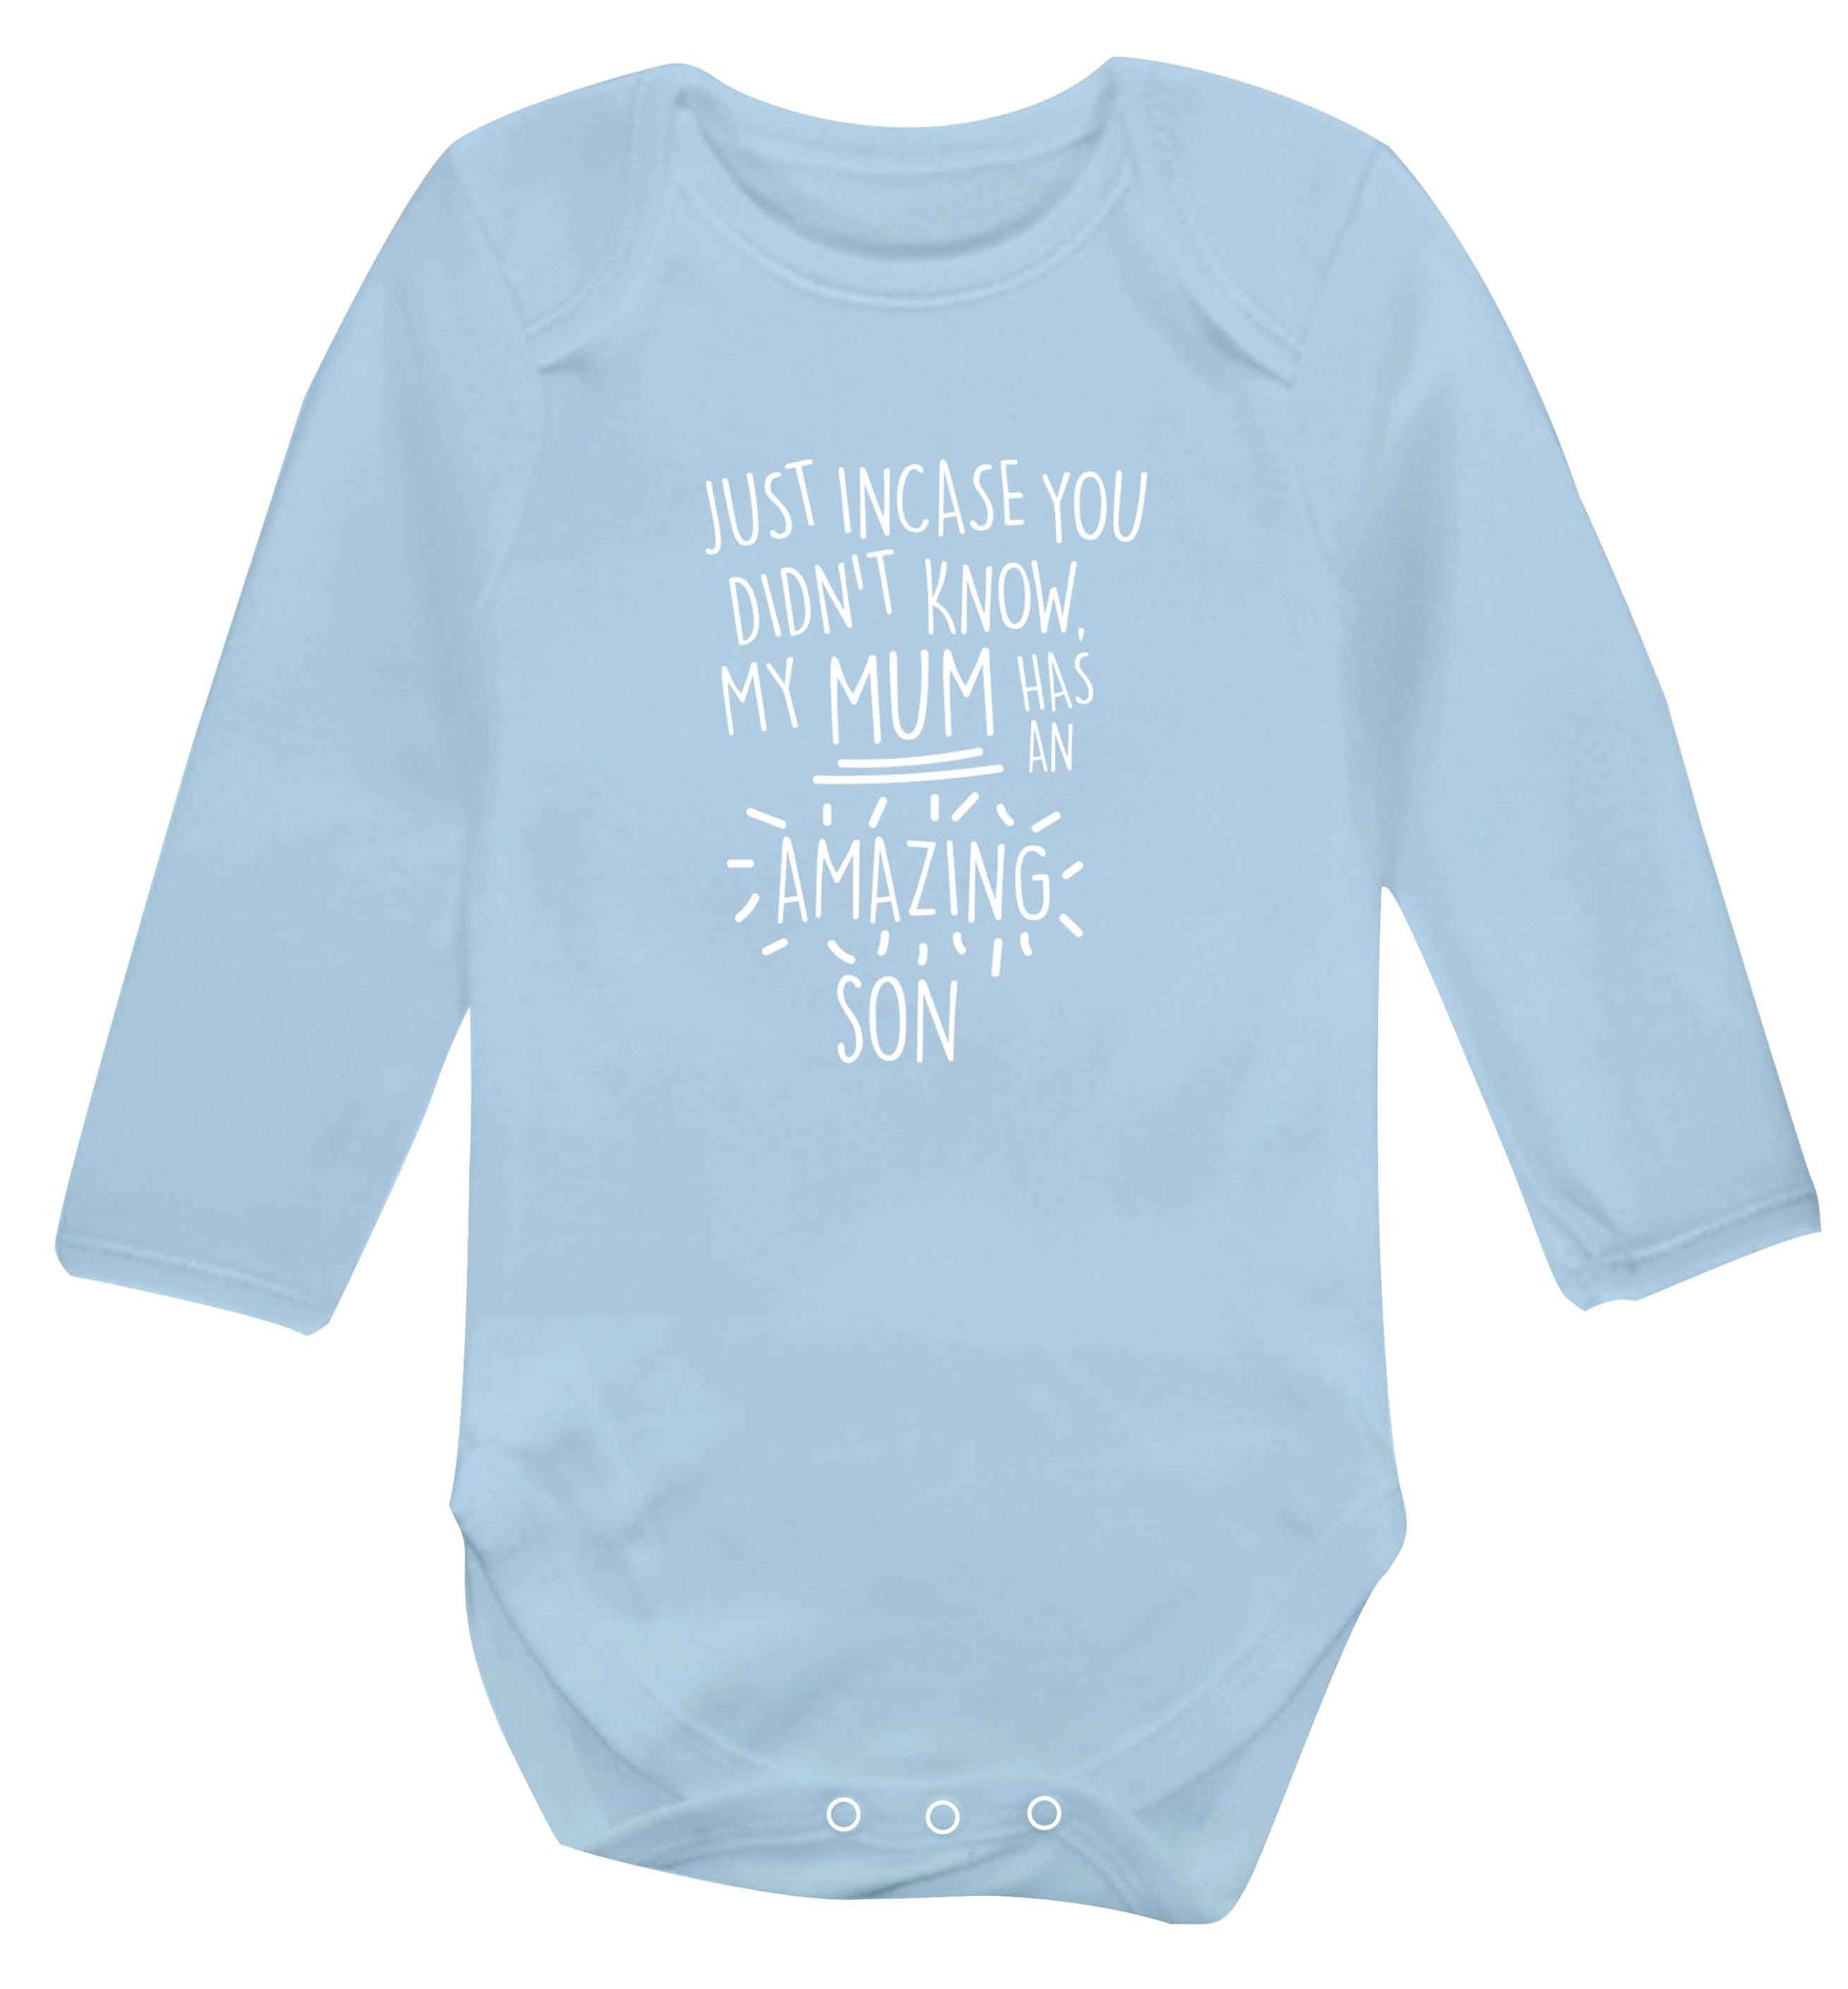 Just incase you didn't know my mum has an amazing son baby vest long sleeved pale blue 6-12 months